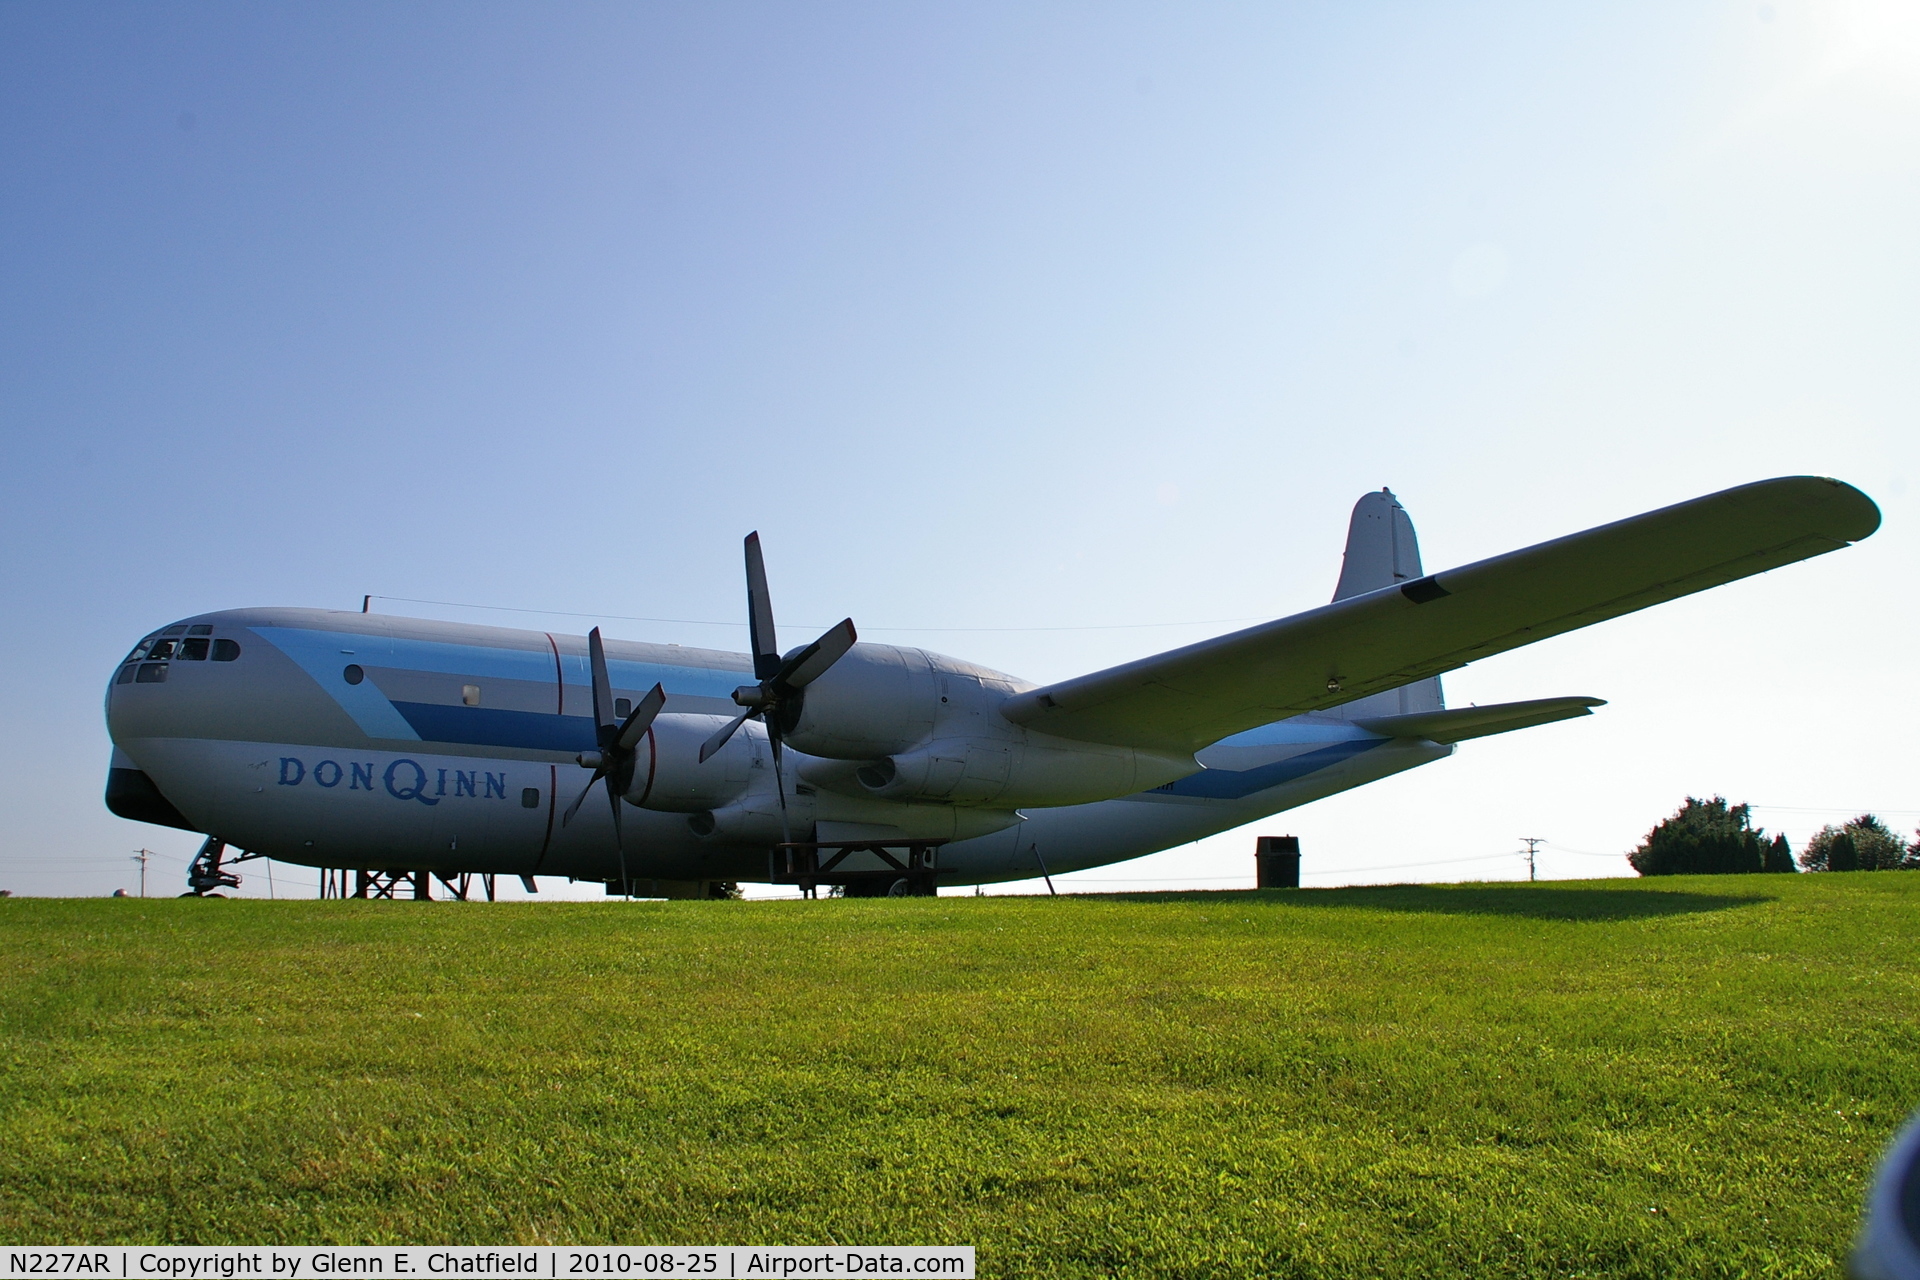 N227AR, 1953 Boeing C-97G Stratofreighter C/N 16795, At the Don Q Inn, north of Dodgeville, WI on SR23